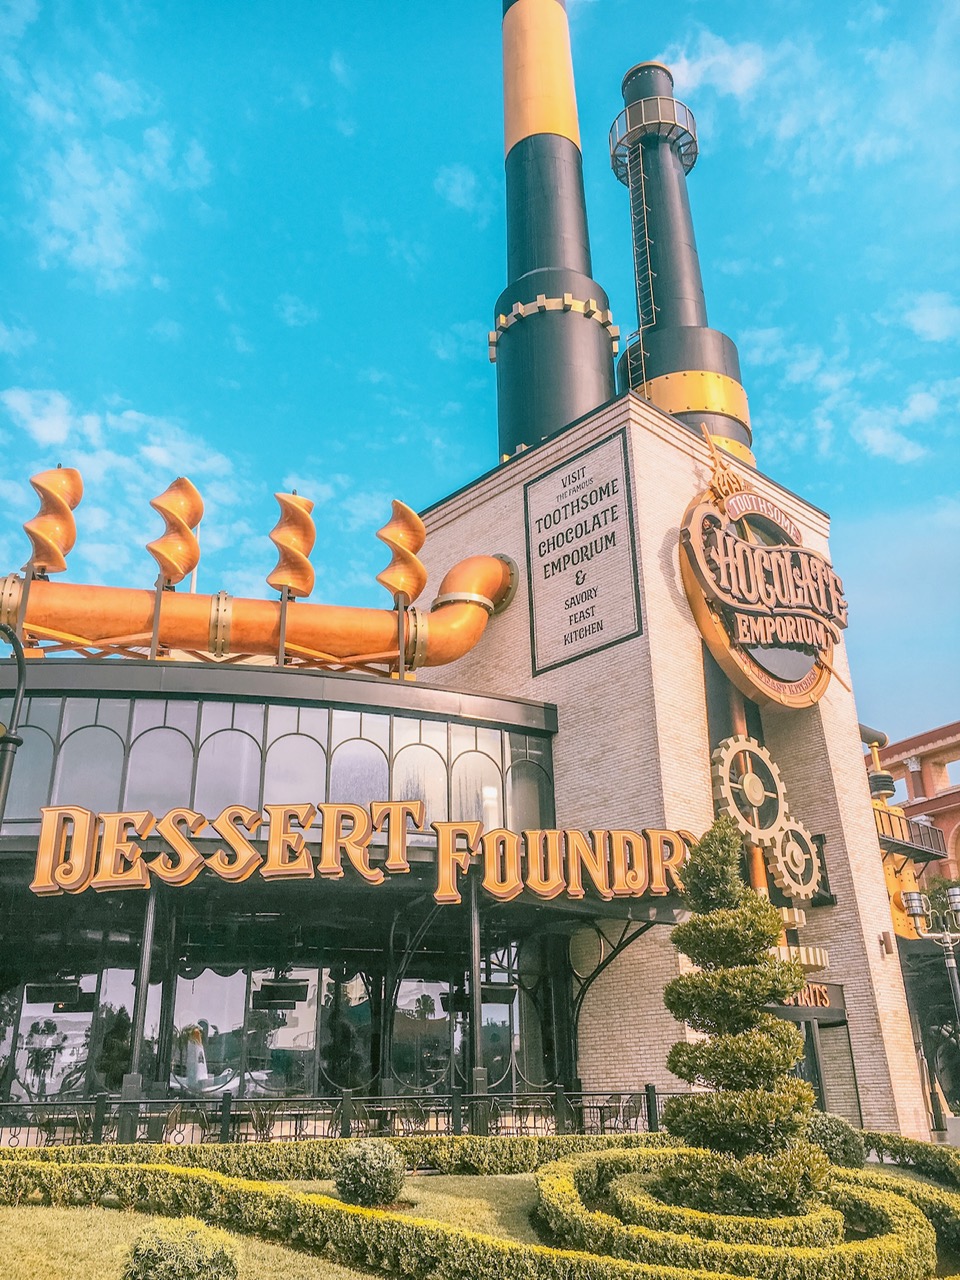 Toothsome Chocolate Emporium at Universal CityWalk - Married with